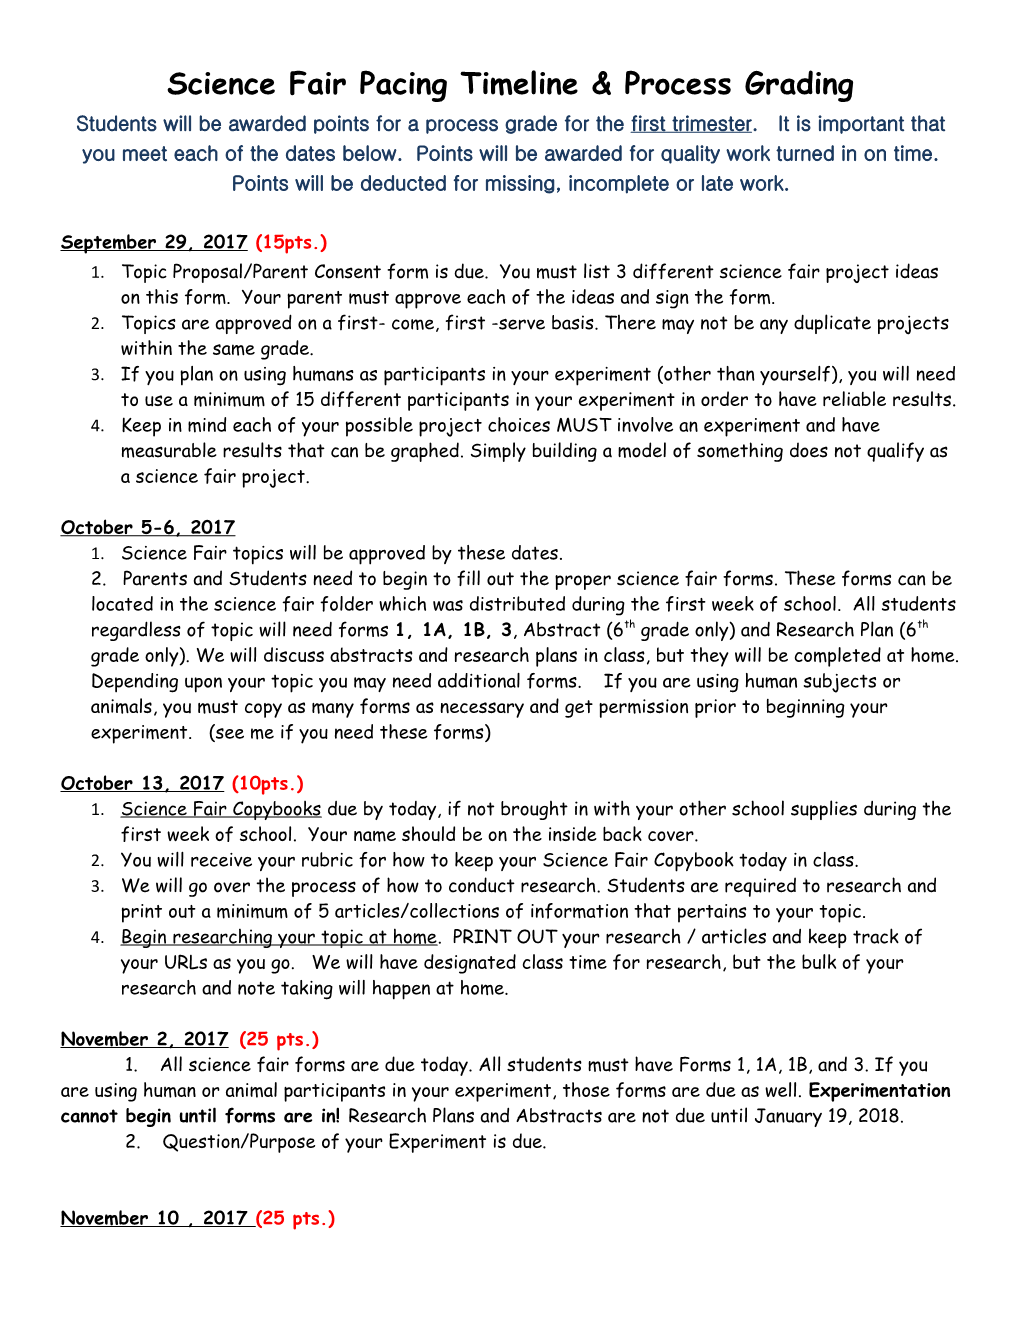 Science Fair Pacing Timeline & Process Grading